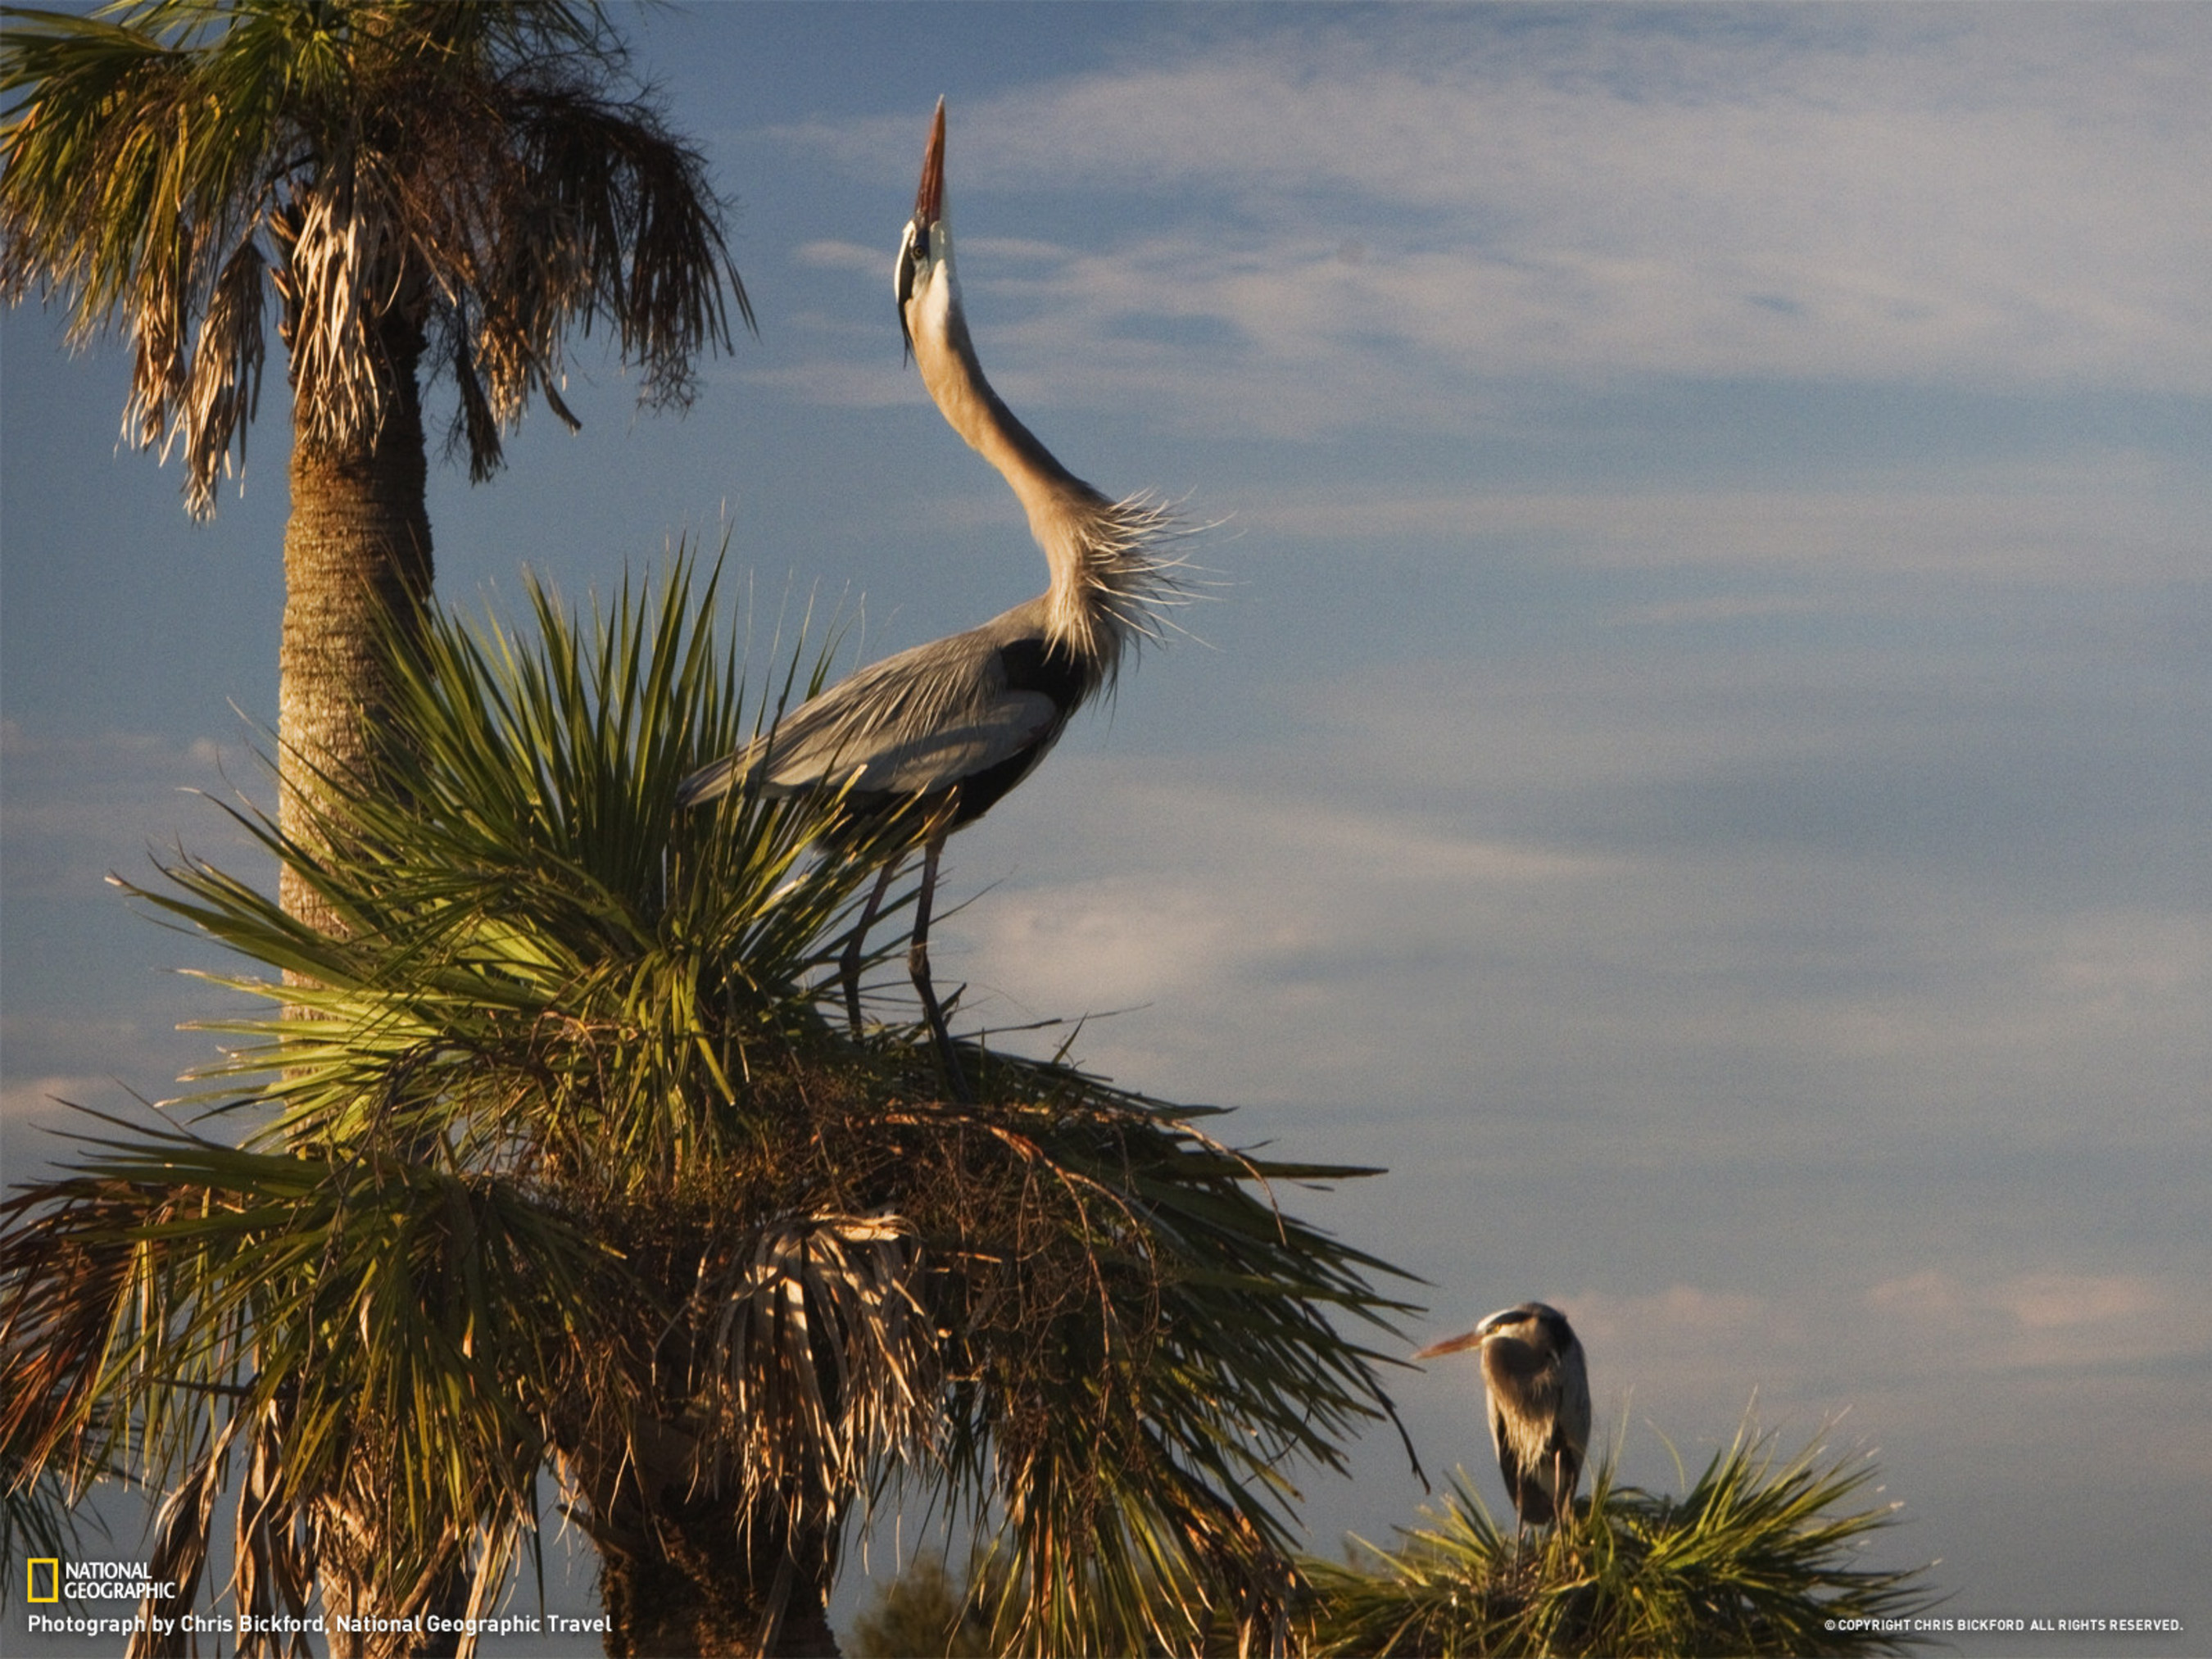 Blue herons are one species of many birds seen in the man-made marshes and lakes collectively known as the Viera Wetlands.